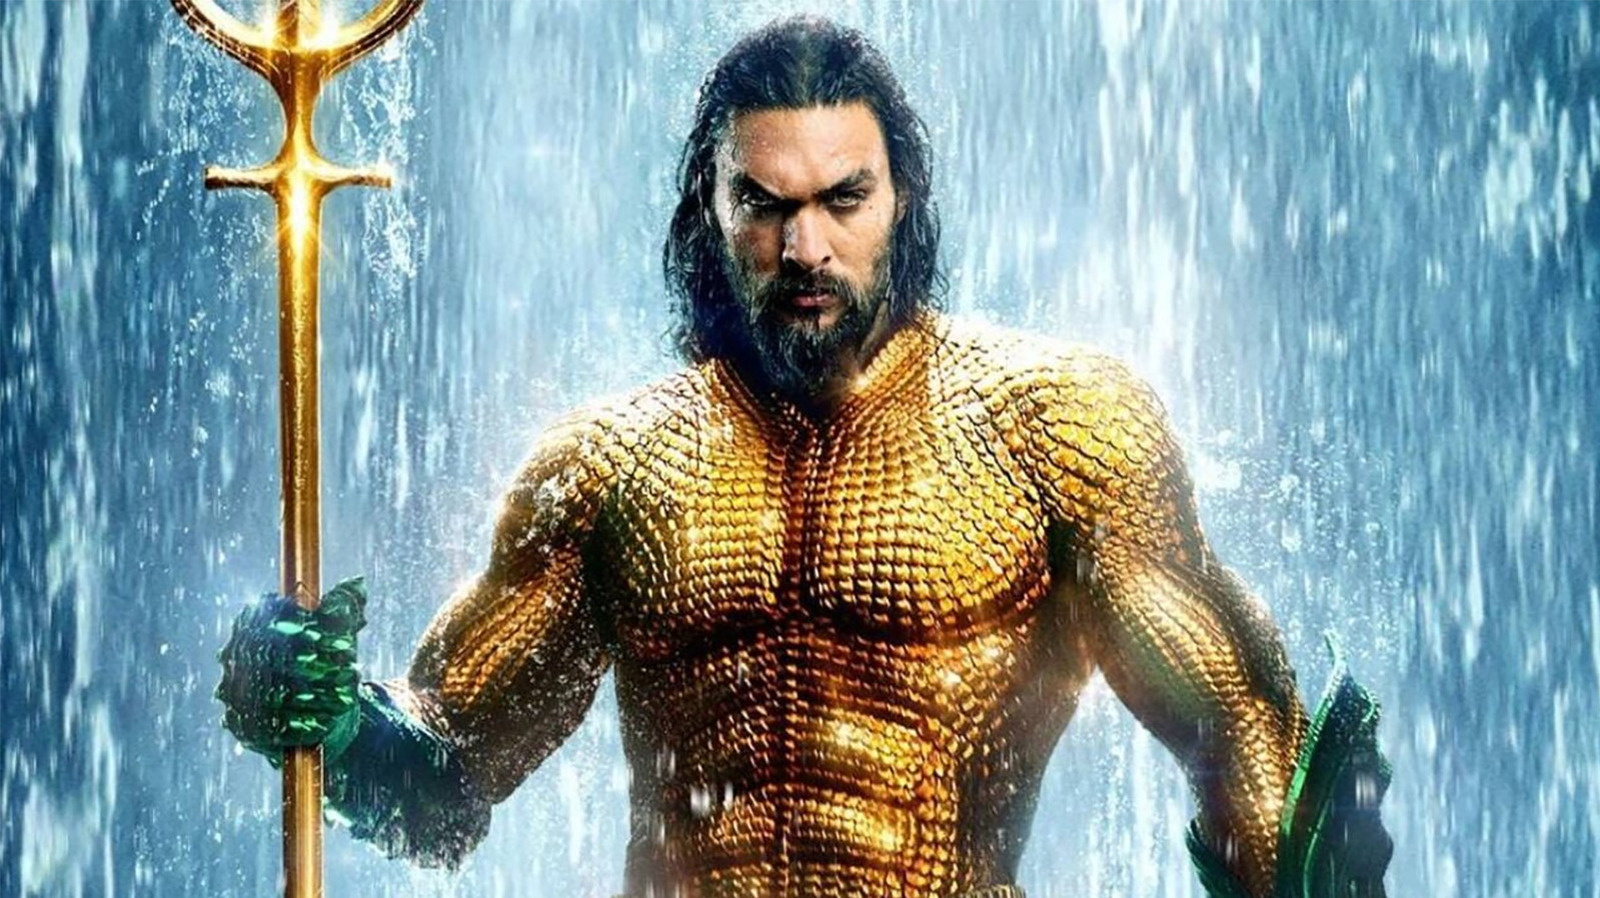 Aquaman 2 Swims To Christmas 2023 And Evil Dead Rise Heads To Theaters As Warner Bros. Schedule